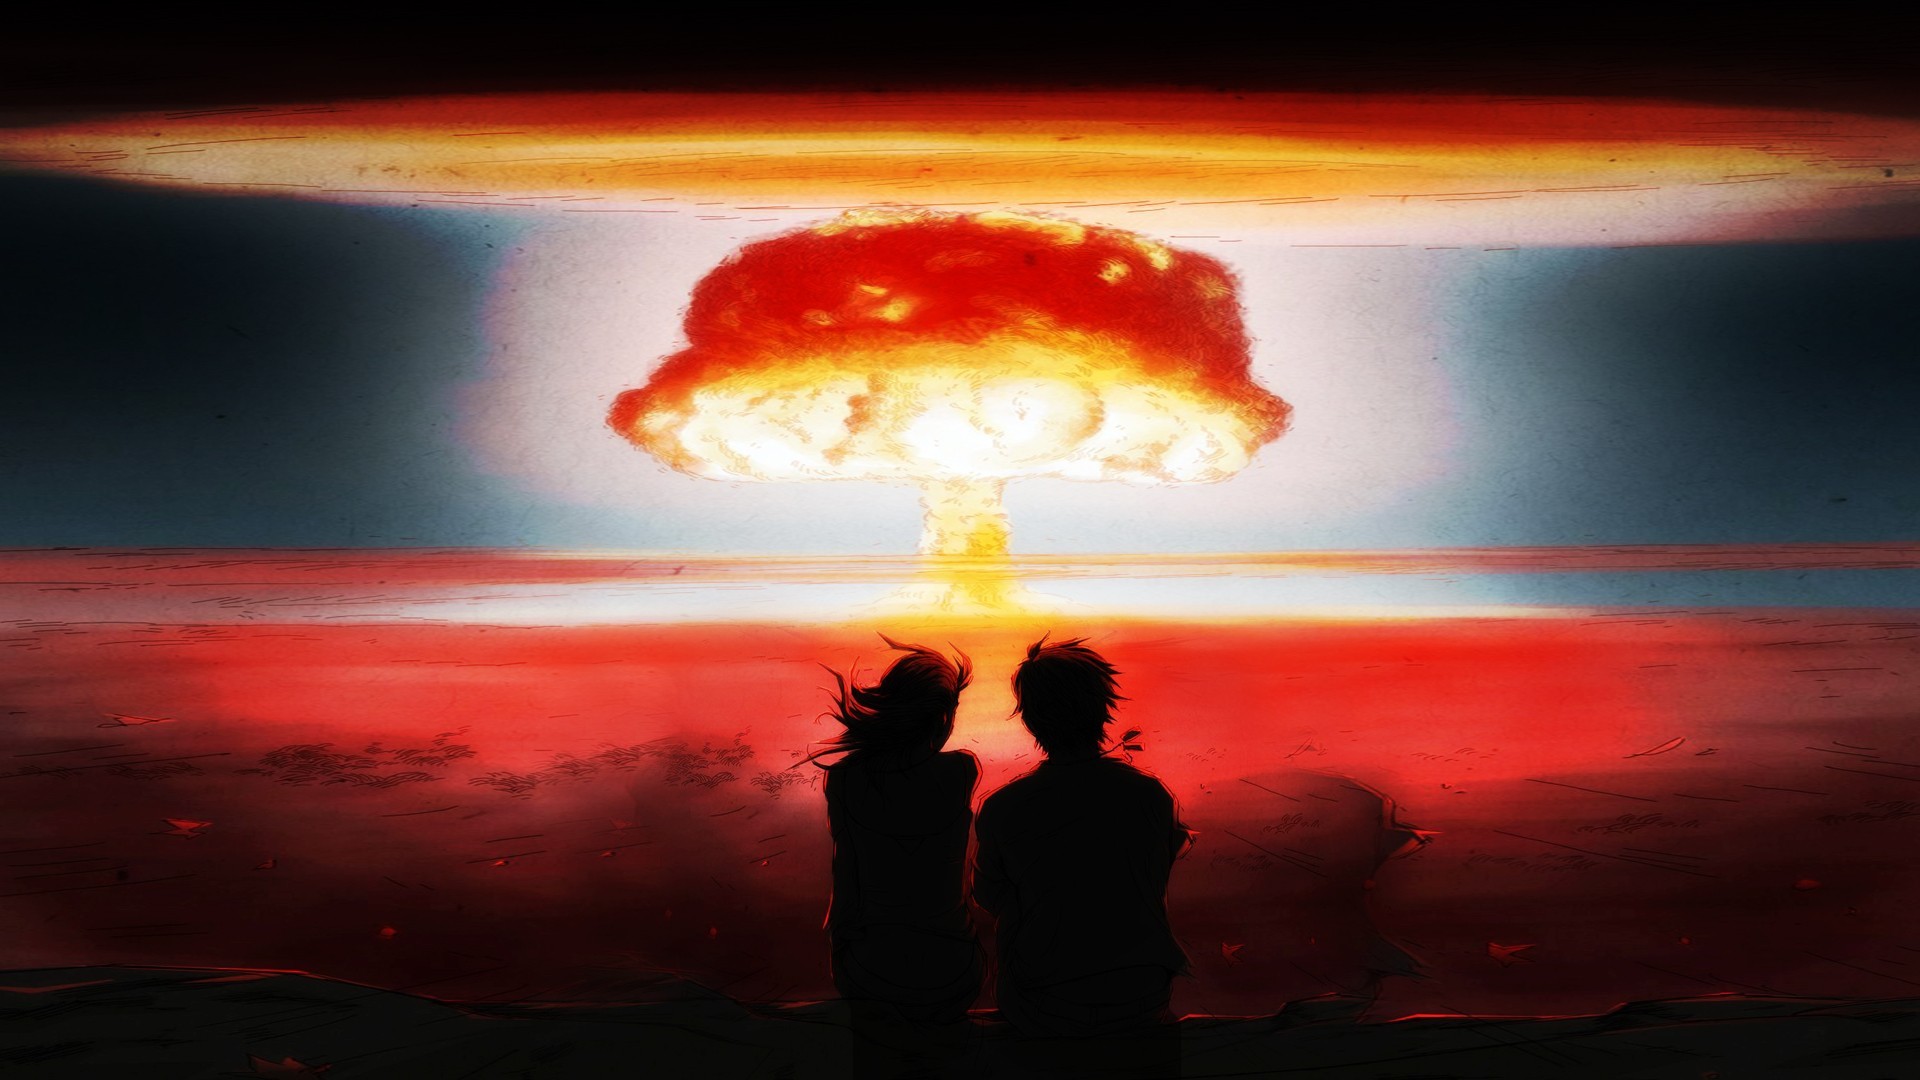 Nuclear Abstract Explosion Atomic Bomb Apocalyptic 1920x1080